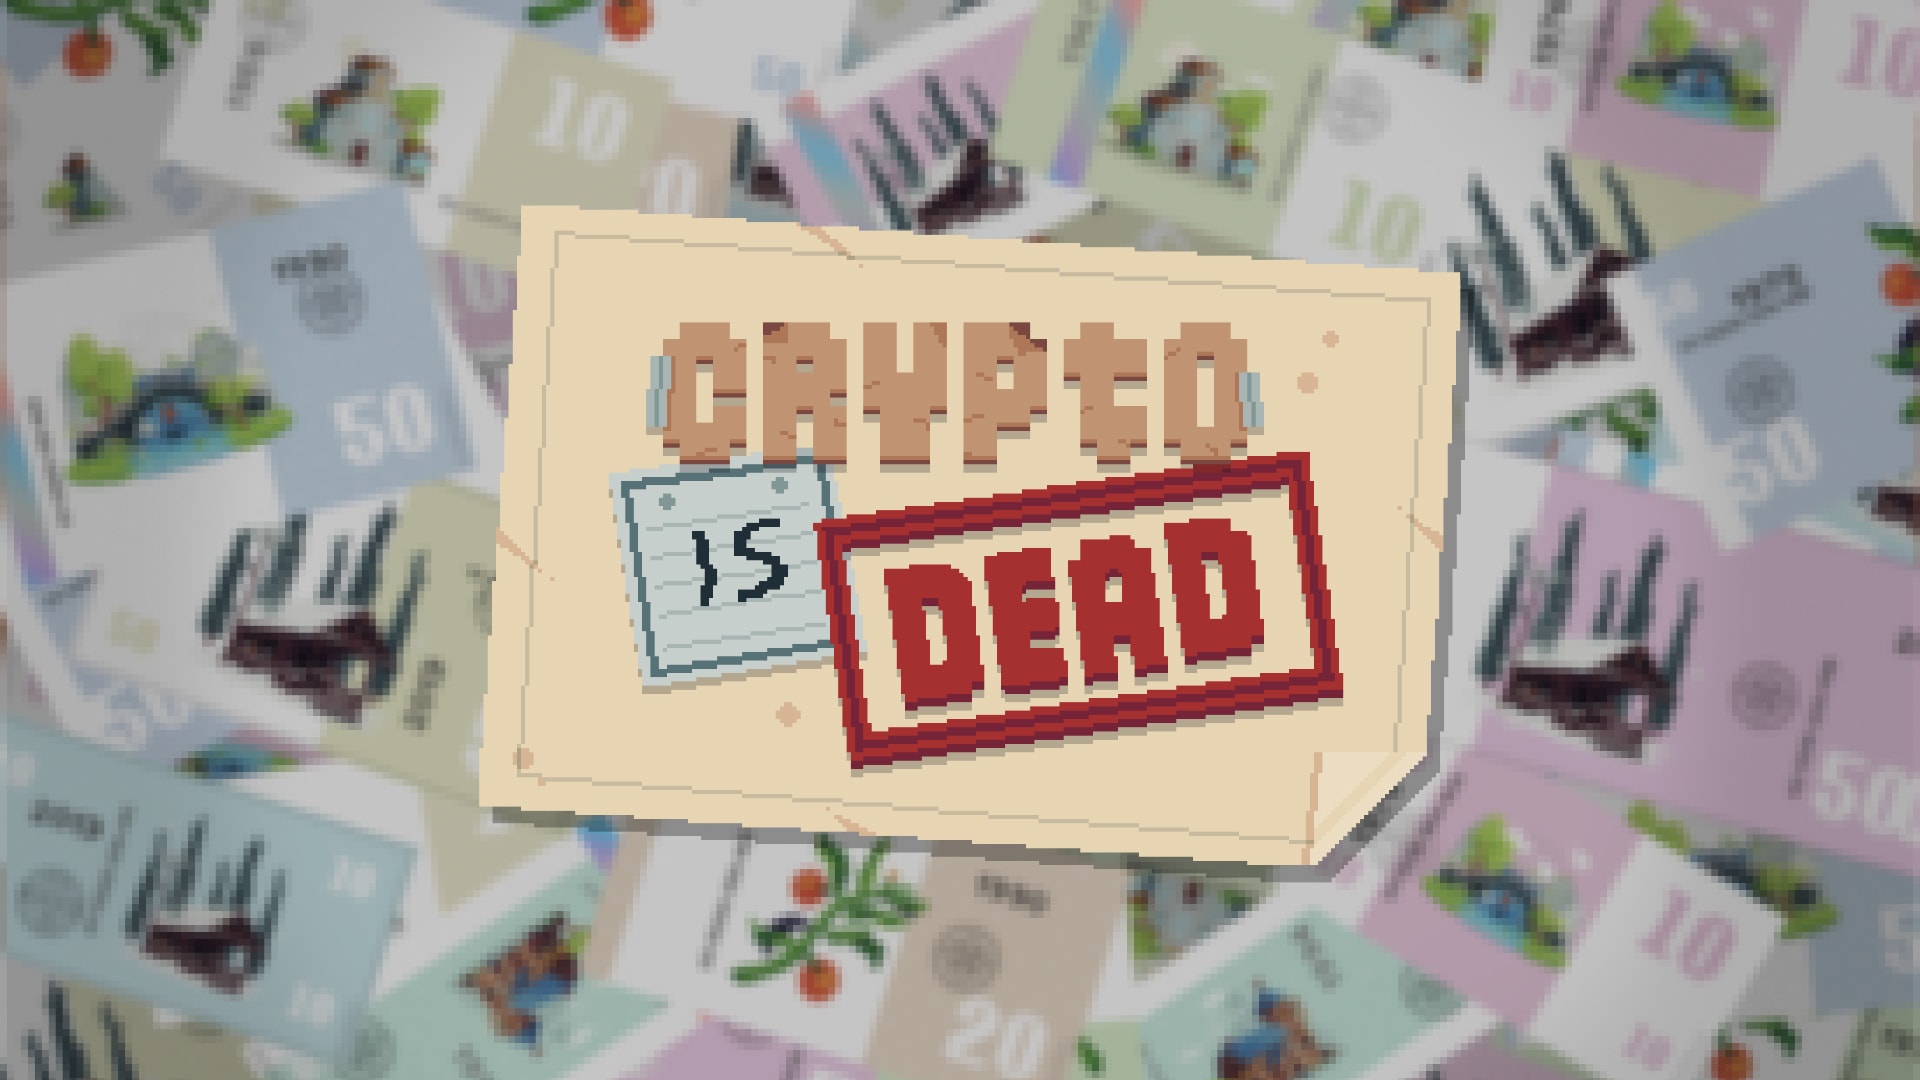 Crypto Is Dead